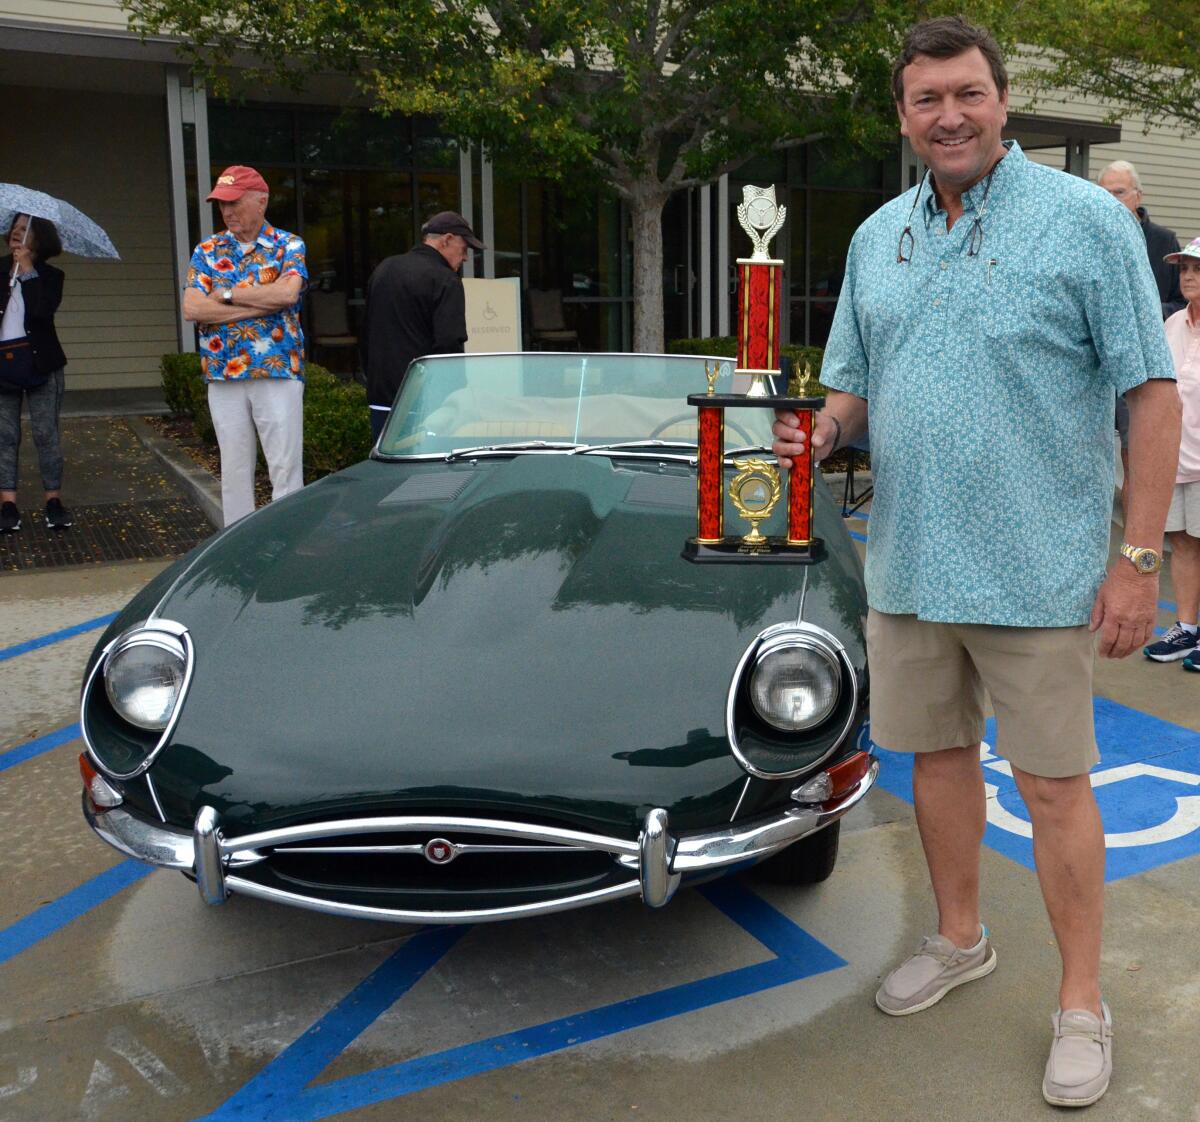 Tim Roberts holds the Best of Show award, for his 1968 Jag-E.